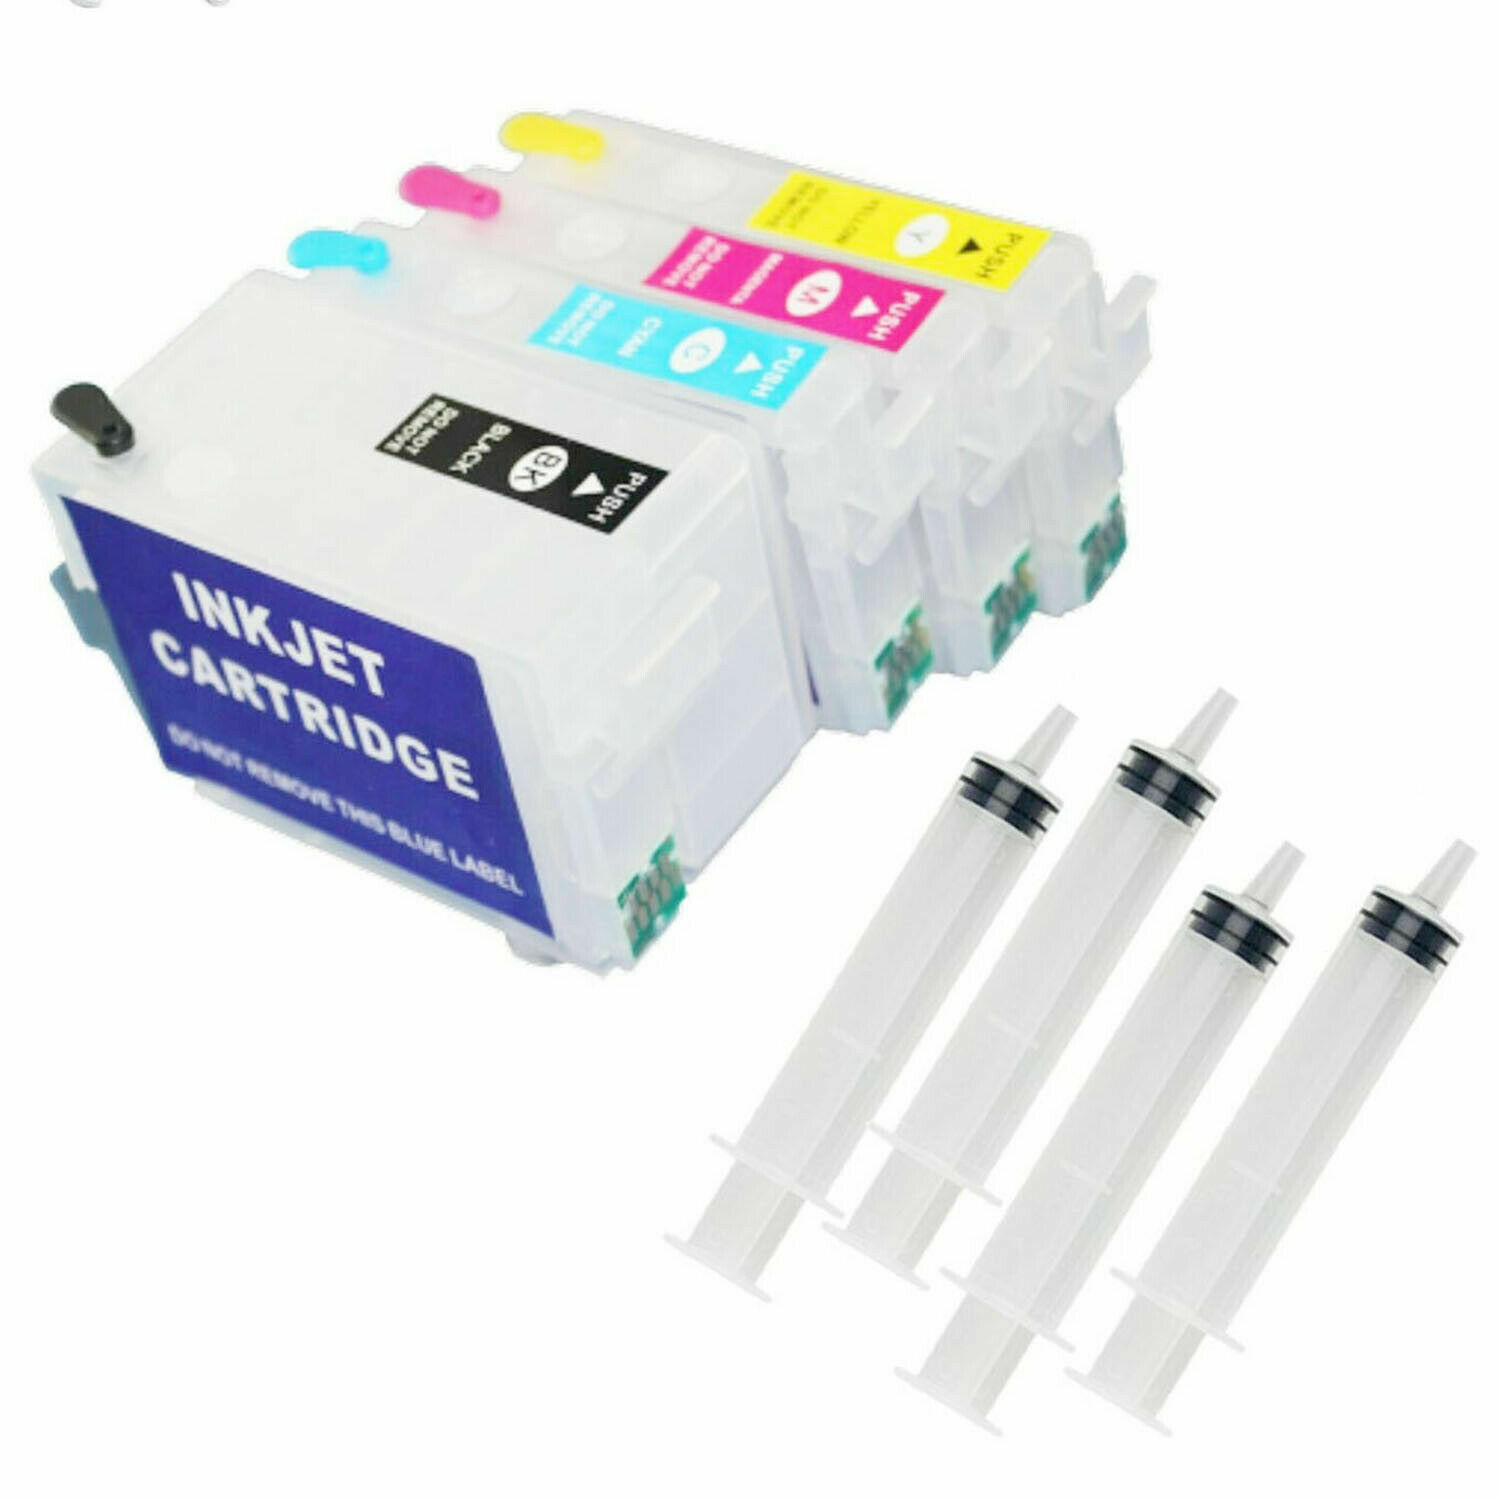 4-Color Refillable ink cartridges - For Epson WorkForce 7610 7710 7210 printers